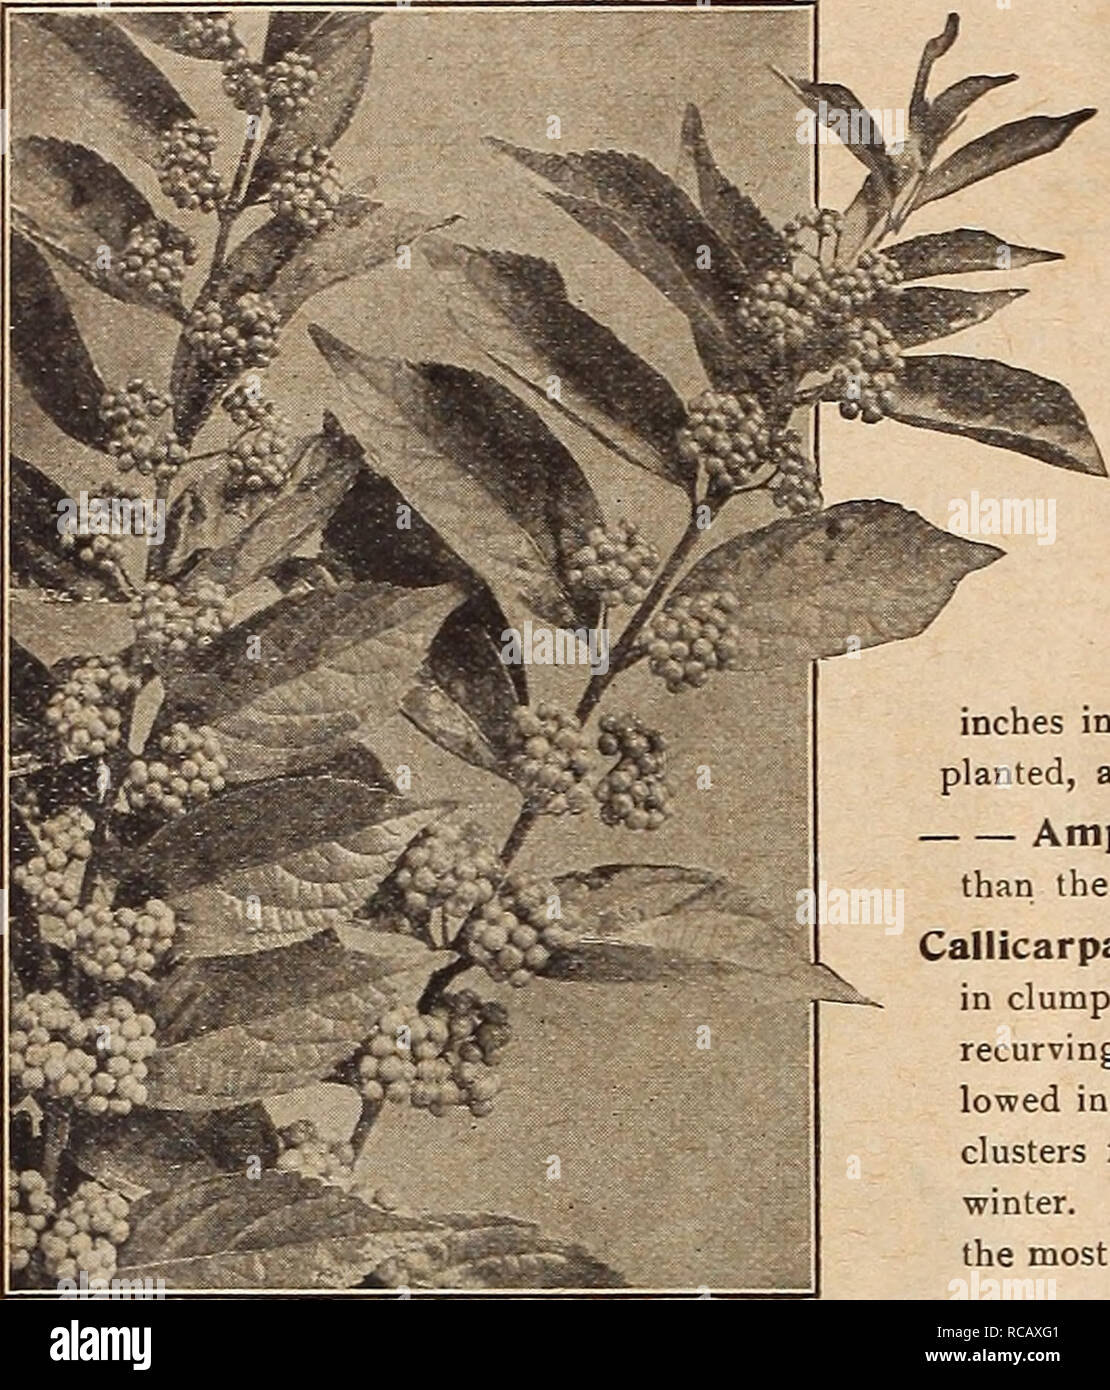 . Dreer's autumn catalogue 1919. Bulbs (Plants) Catalogs; Flowers Seeds Catalogs; Gardening Equipment and supplies Catalogs; Nurseries (Horticulture) Catalogs; Vegetables Seeds Catalogs. 50 nr nmRrADRHR-PHiiADHiPtiiAMm CHOICE hardy subuss ;. Callicarpa Purpurea Amorpha Frutlcosa {False Indigo). A strong-growing Shrub, from 6 to 7 leet high, with finger-like spikes of indigo- colored flowers, three or more spikes in a cluster; blooms early in June. 50 cts. each. Aralia Spinosa {Hercules Club, Angelica Tree, or Devil'sWaVang- stick.) A singular native tree-like Shrub, growing from 10 to 15 feet  Stock Photo